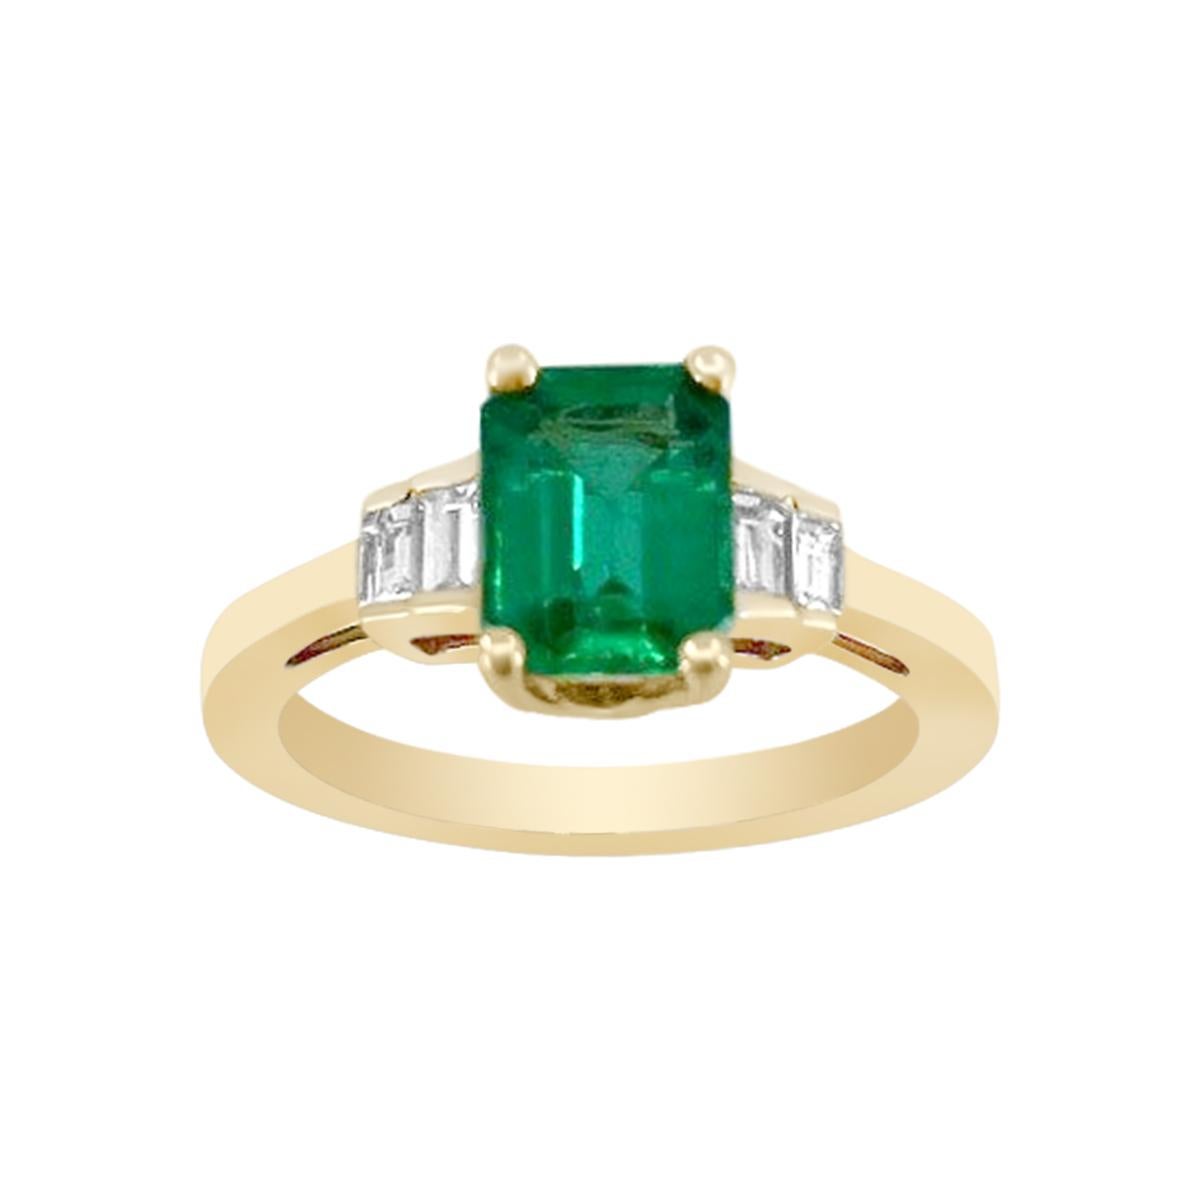 Octagon Cut 18K Yellow Gold 1.13cts Emerald and Diamond Ring, Style# R1538